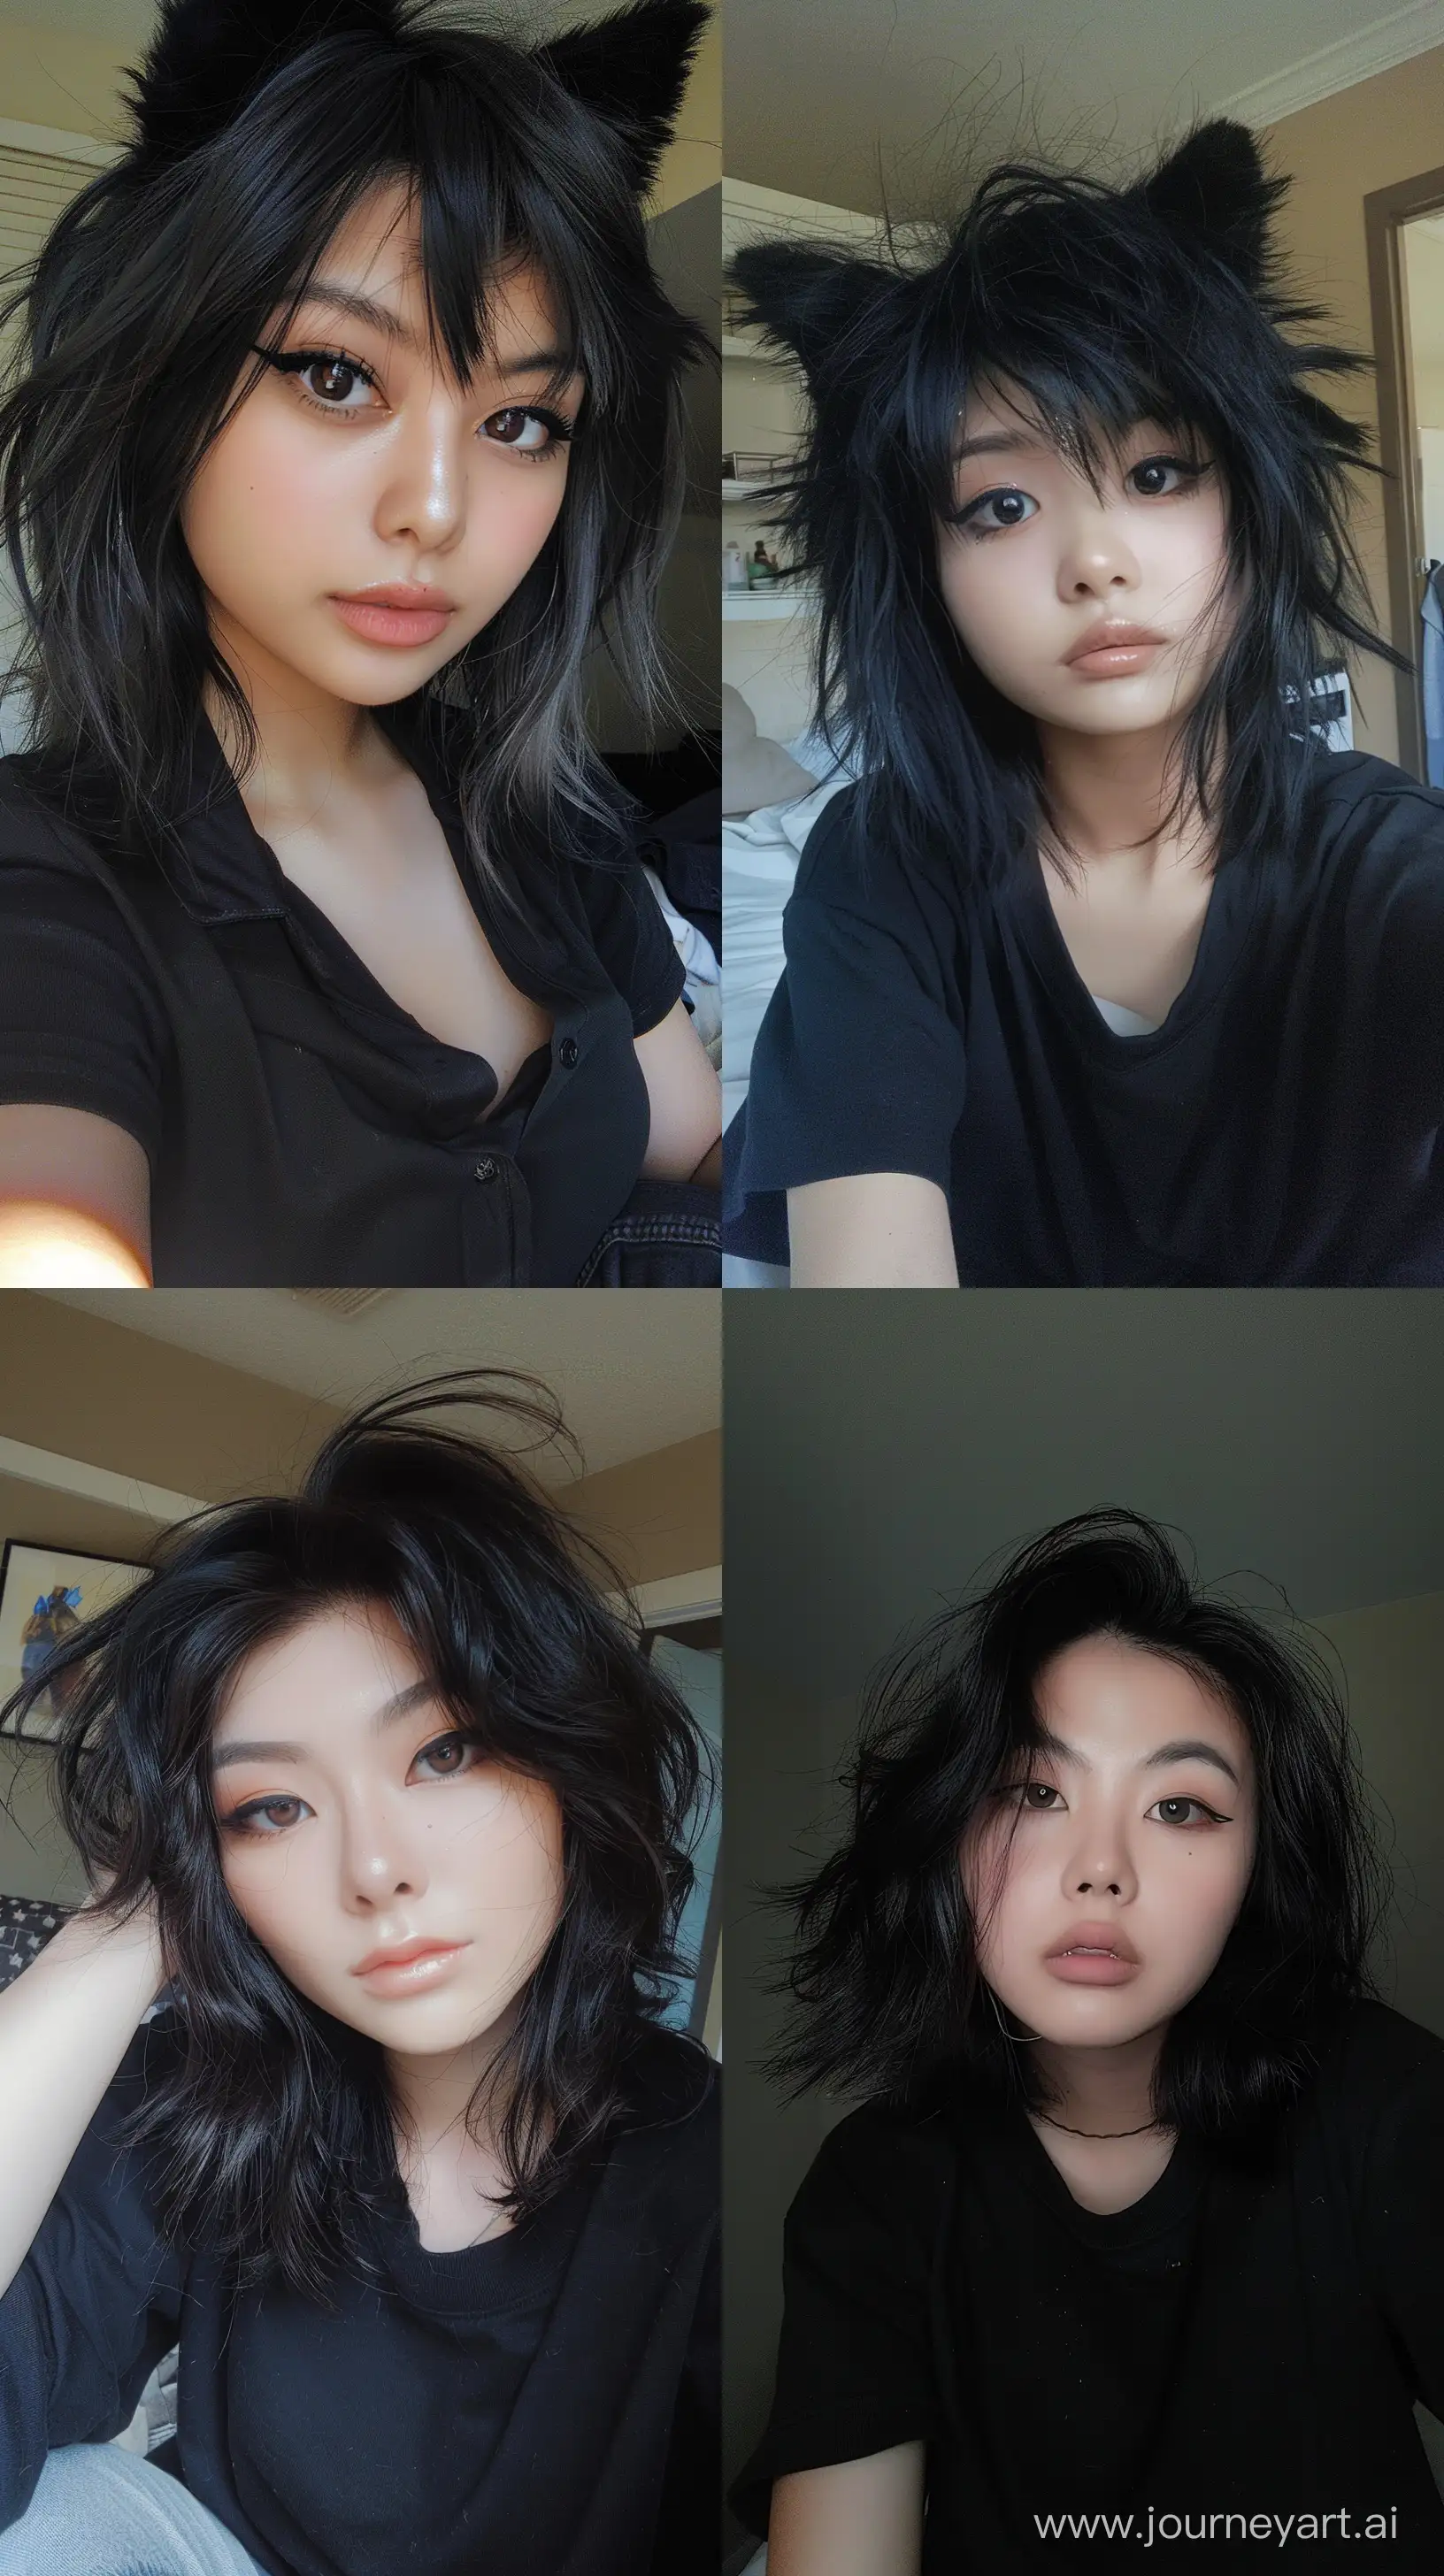 Stylish-Asian-Girl-Capturing-a-Chic-Selfie-with-Aesthetic-Makeup-and-Black-Attire